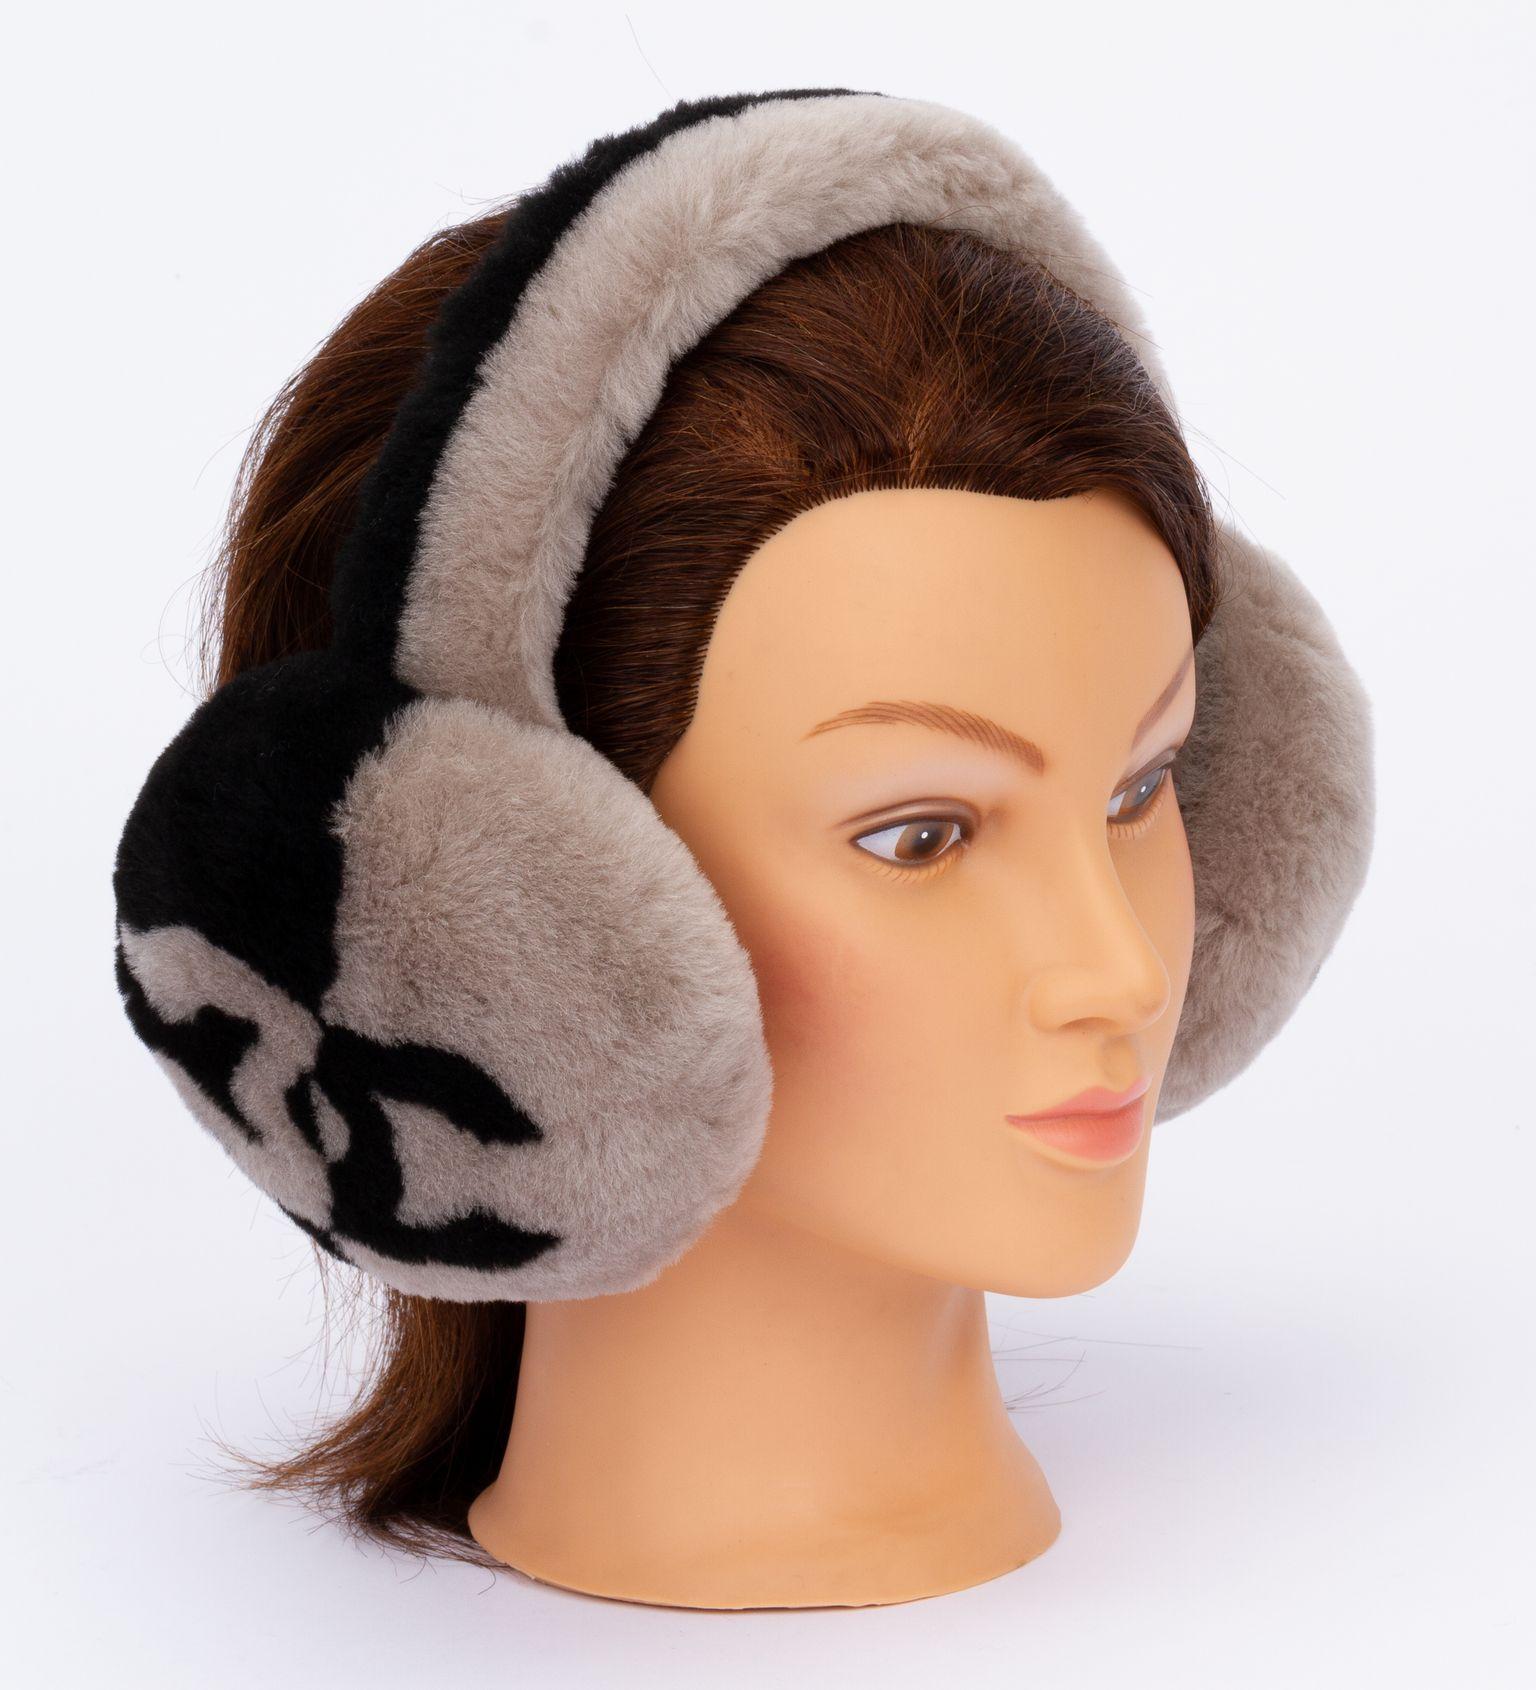 Original Chanel CC Shearling Ear Muffs in black and taupe. The earmuffs are made out of shearling and have a CC logo on each side. The piece comes in the original box and is brand new.